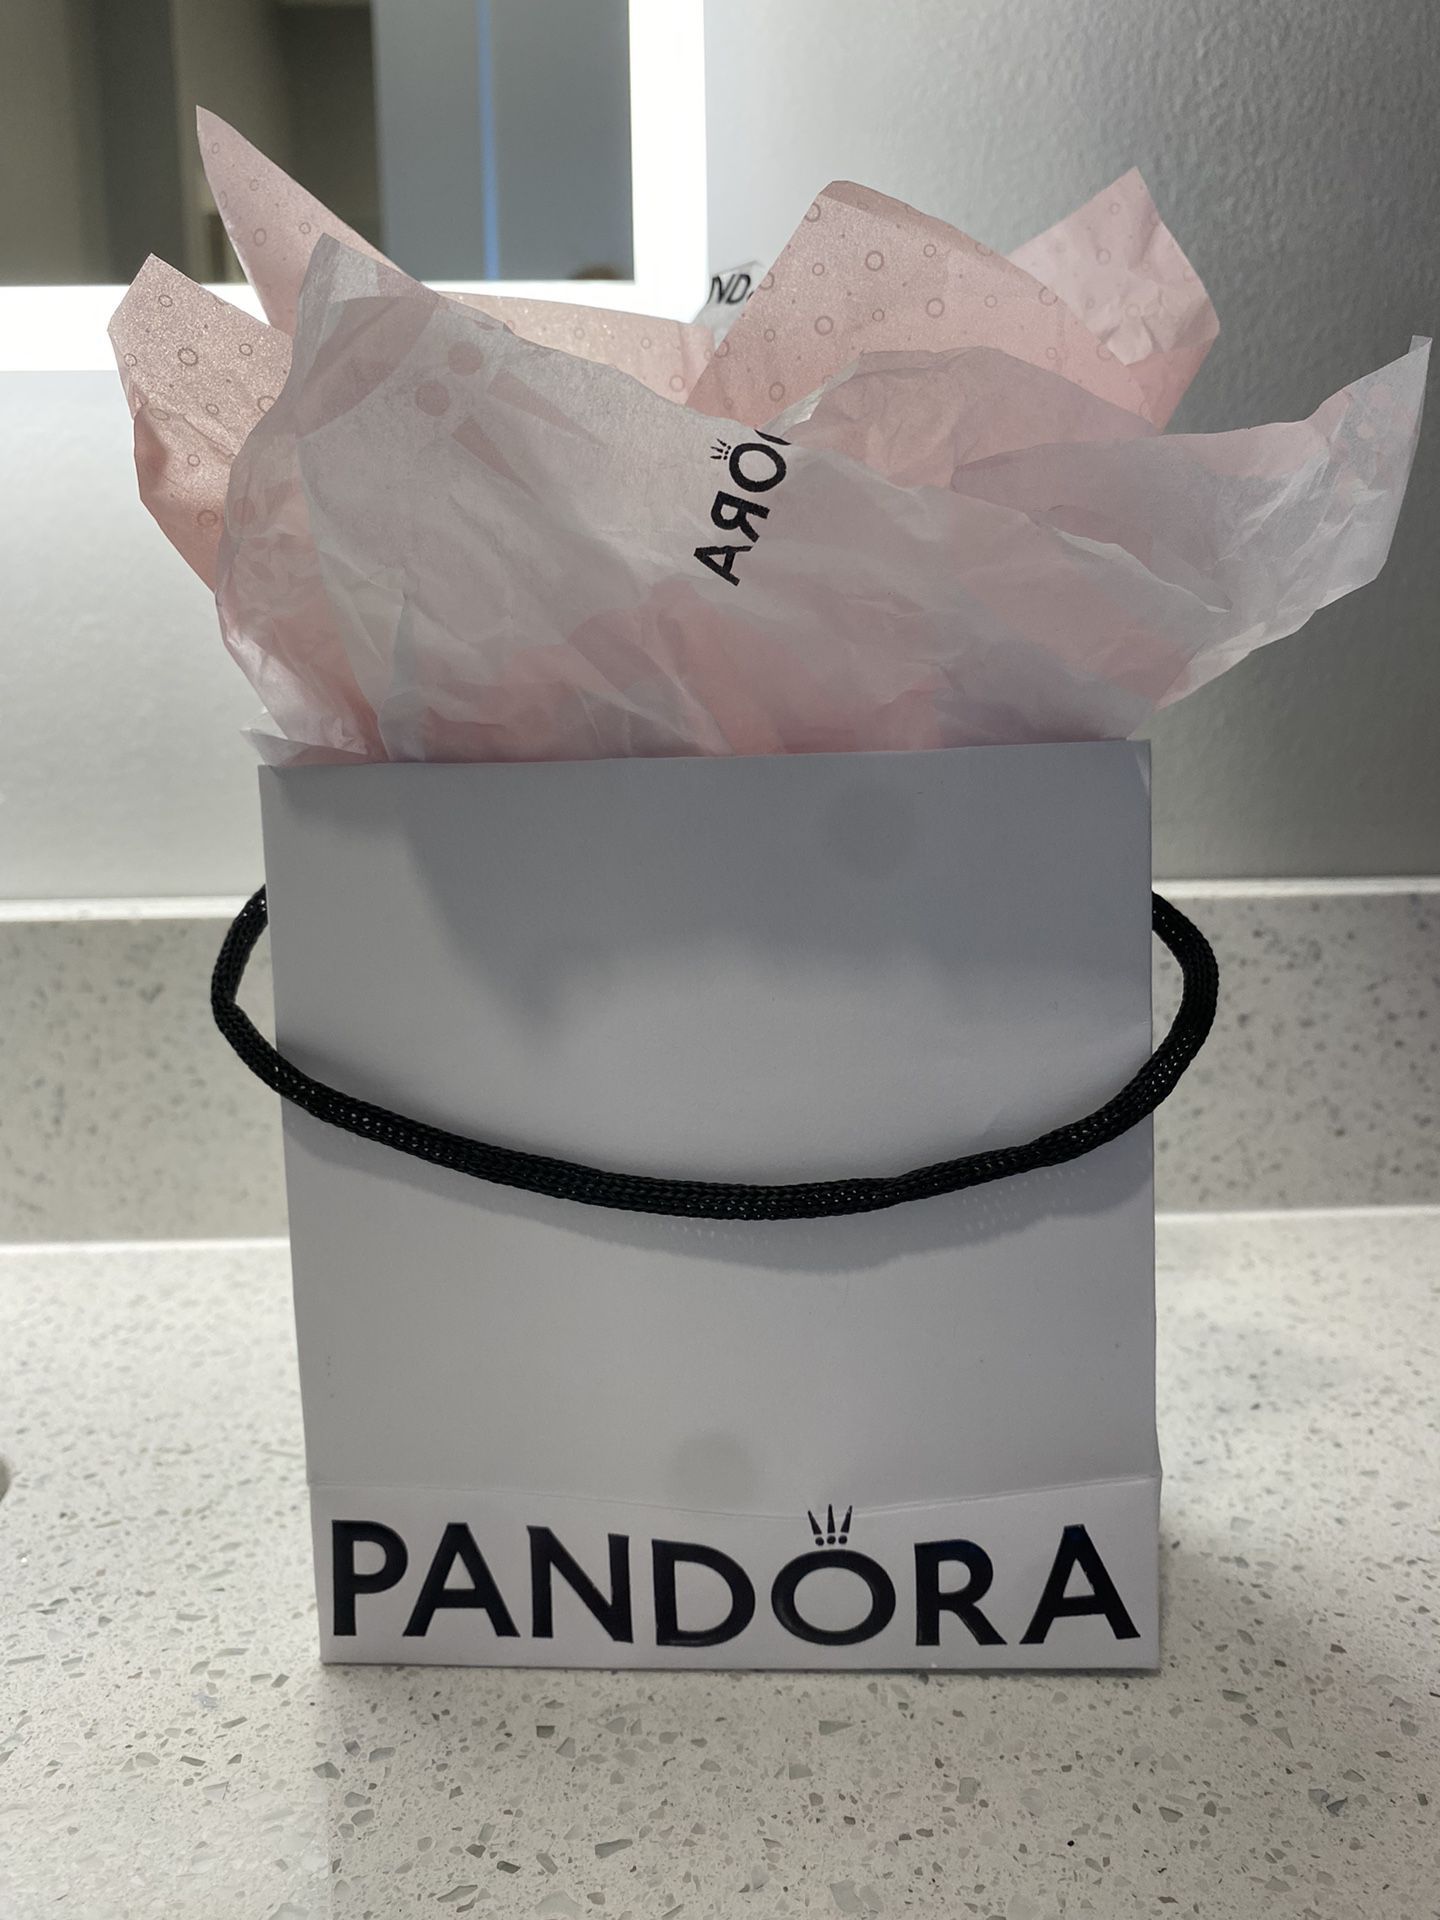 Pandora Charm - “Friends are the Family you choose” Will Ship Best Offer